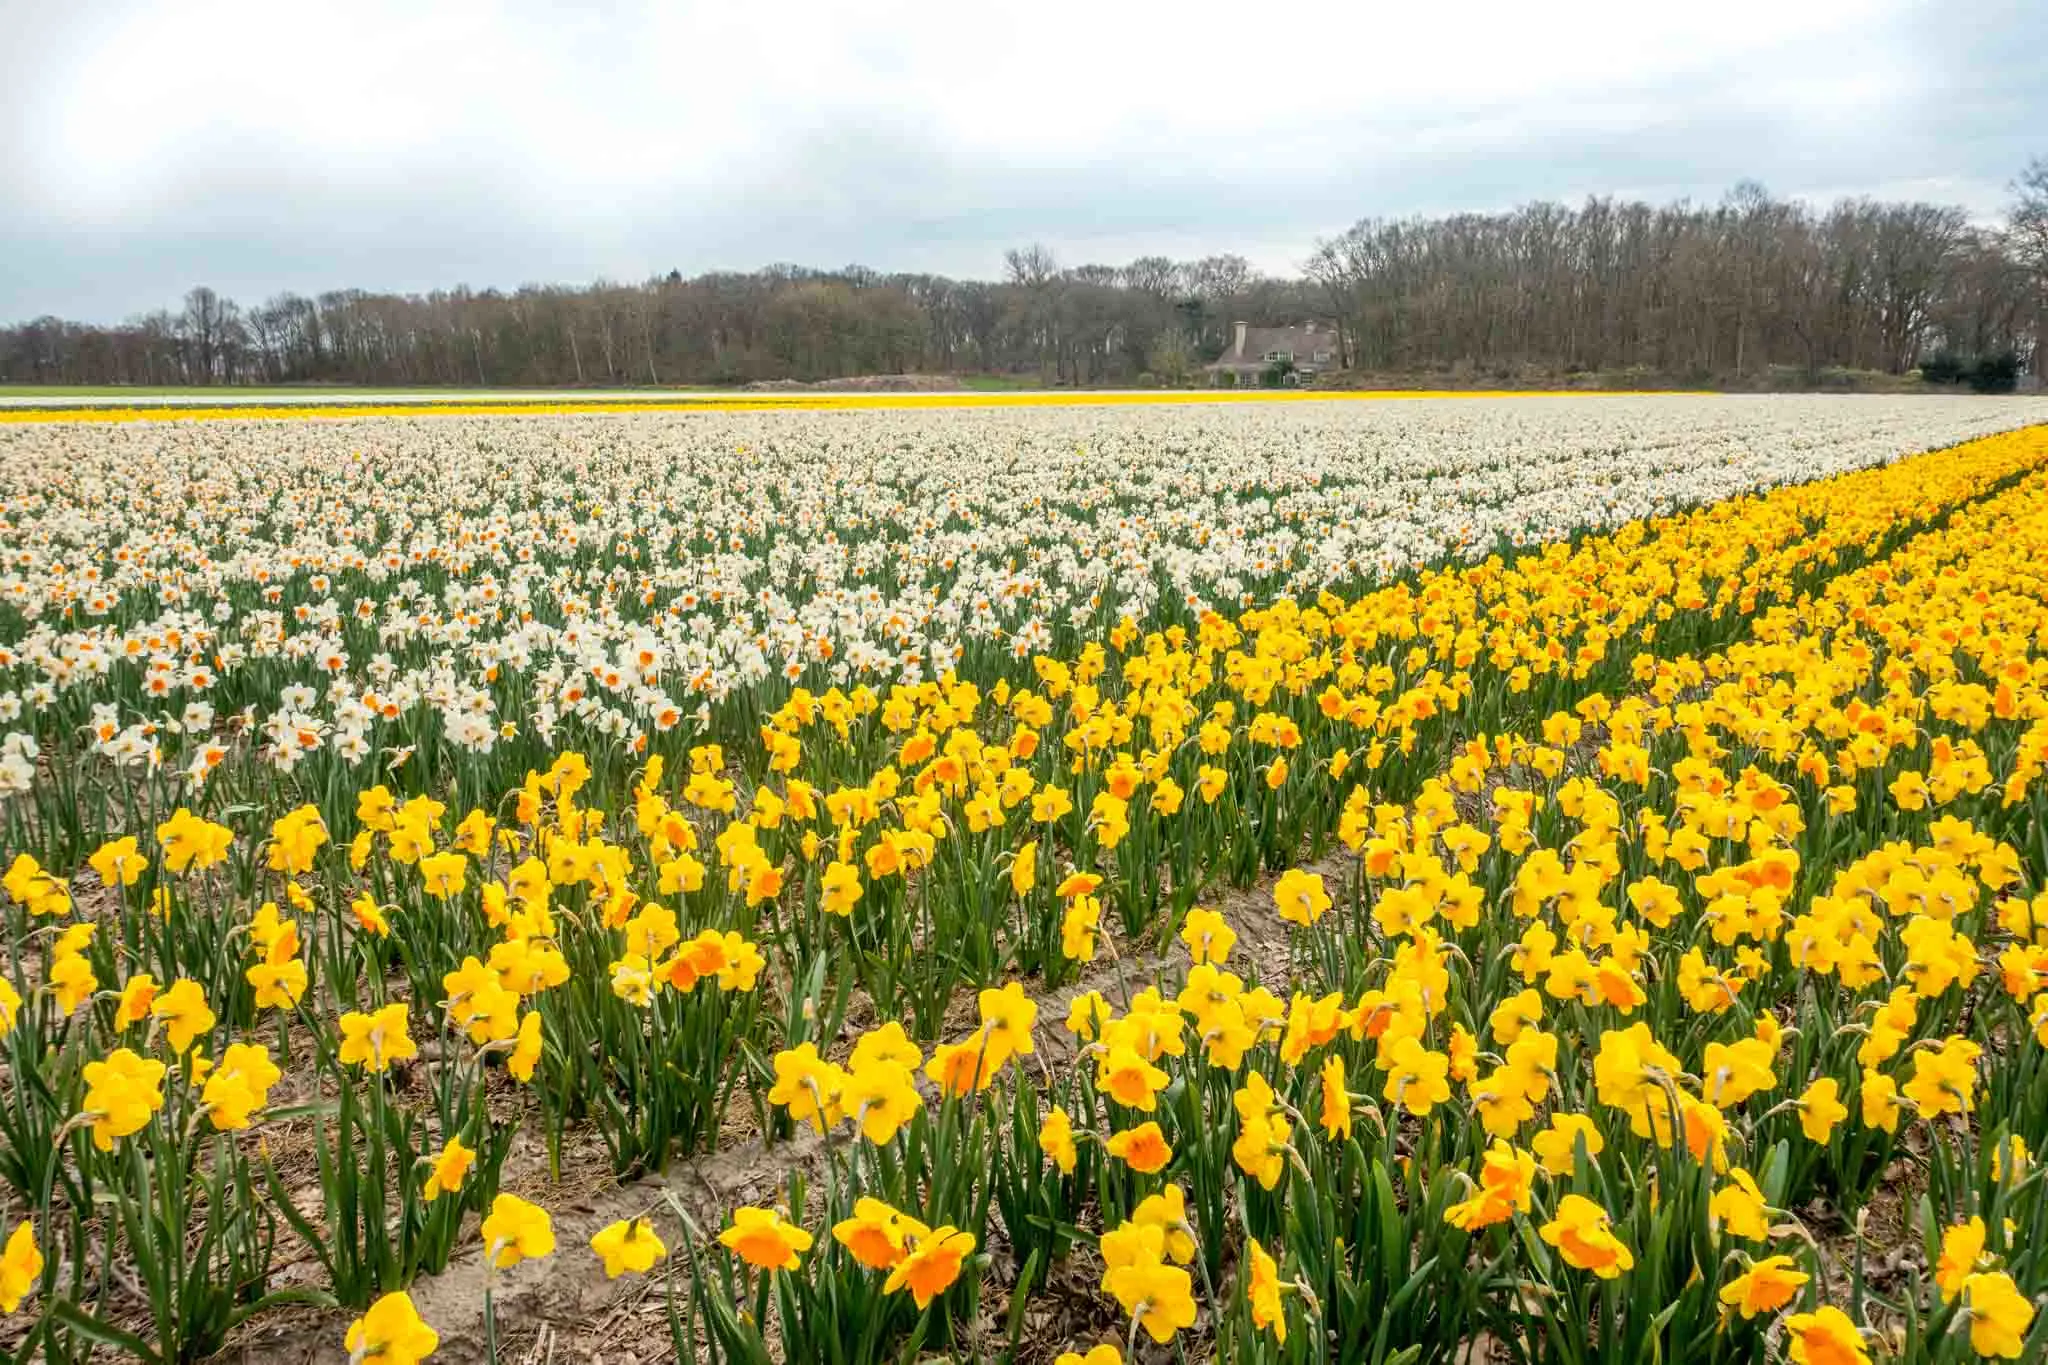 Rows of yellow and white daffodils in a field